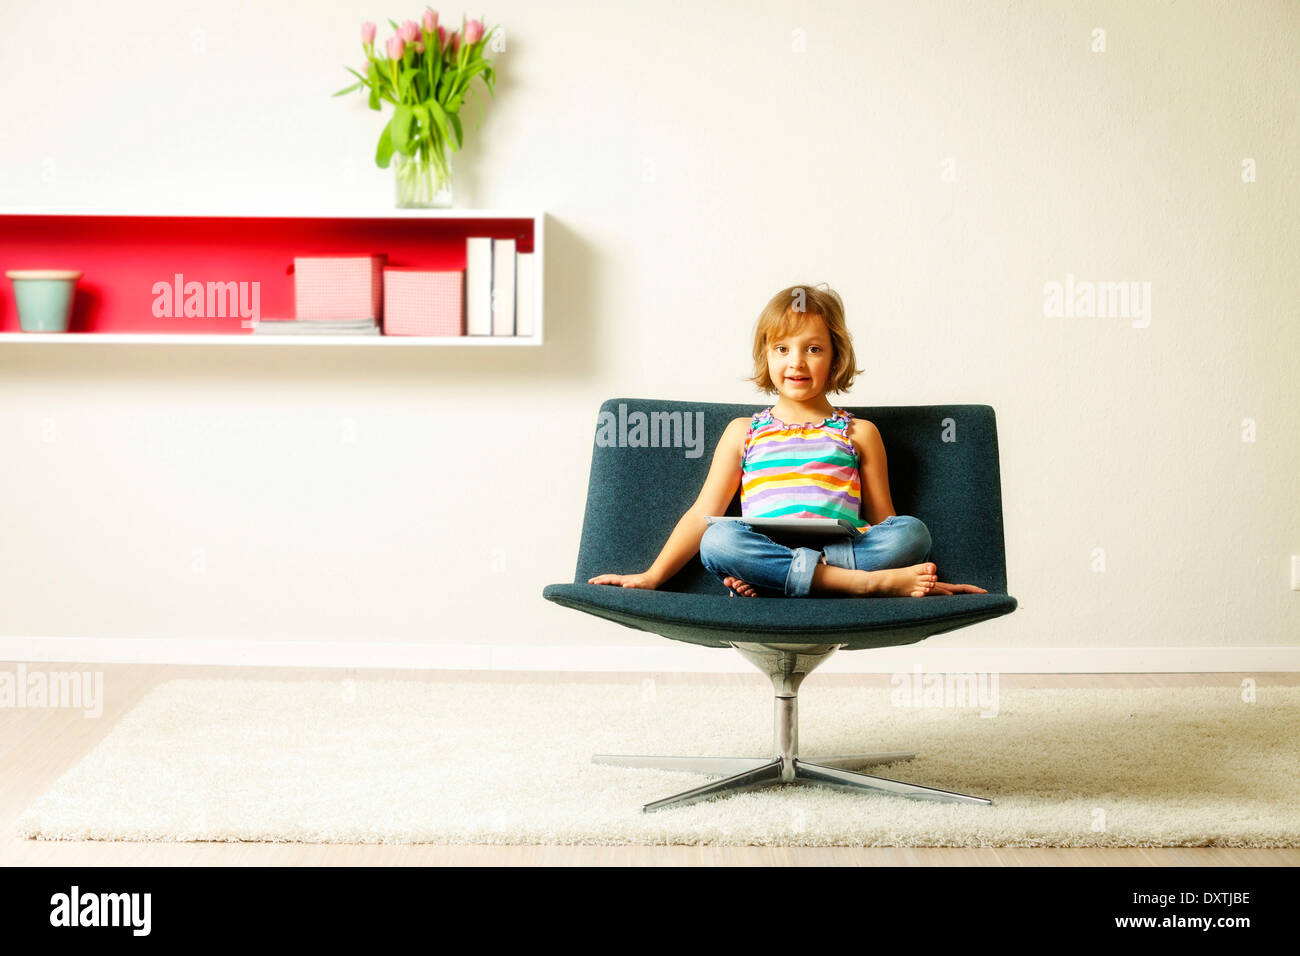 Girl sits in chair using tablet computer, Munich, Bavaria, Germany Stock Photo